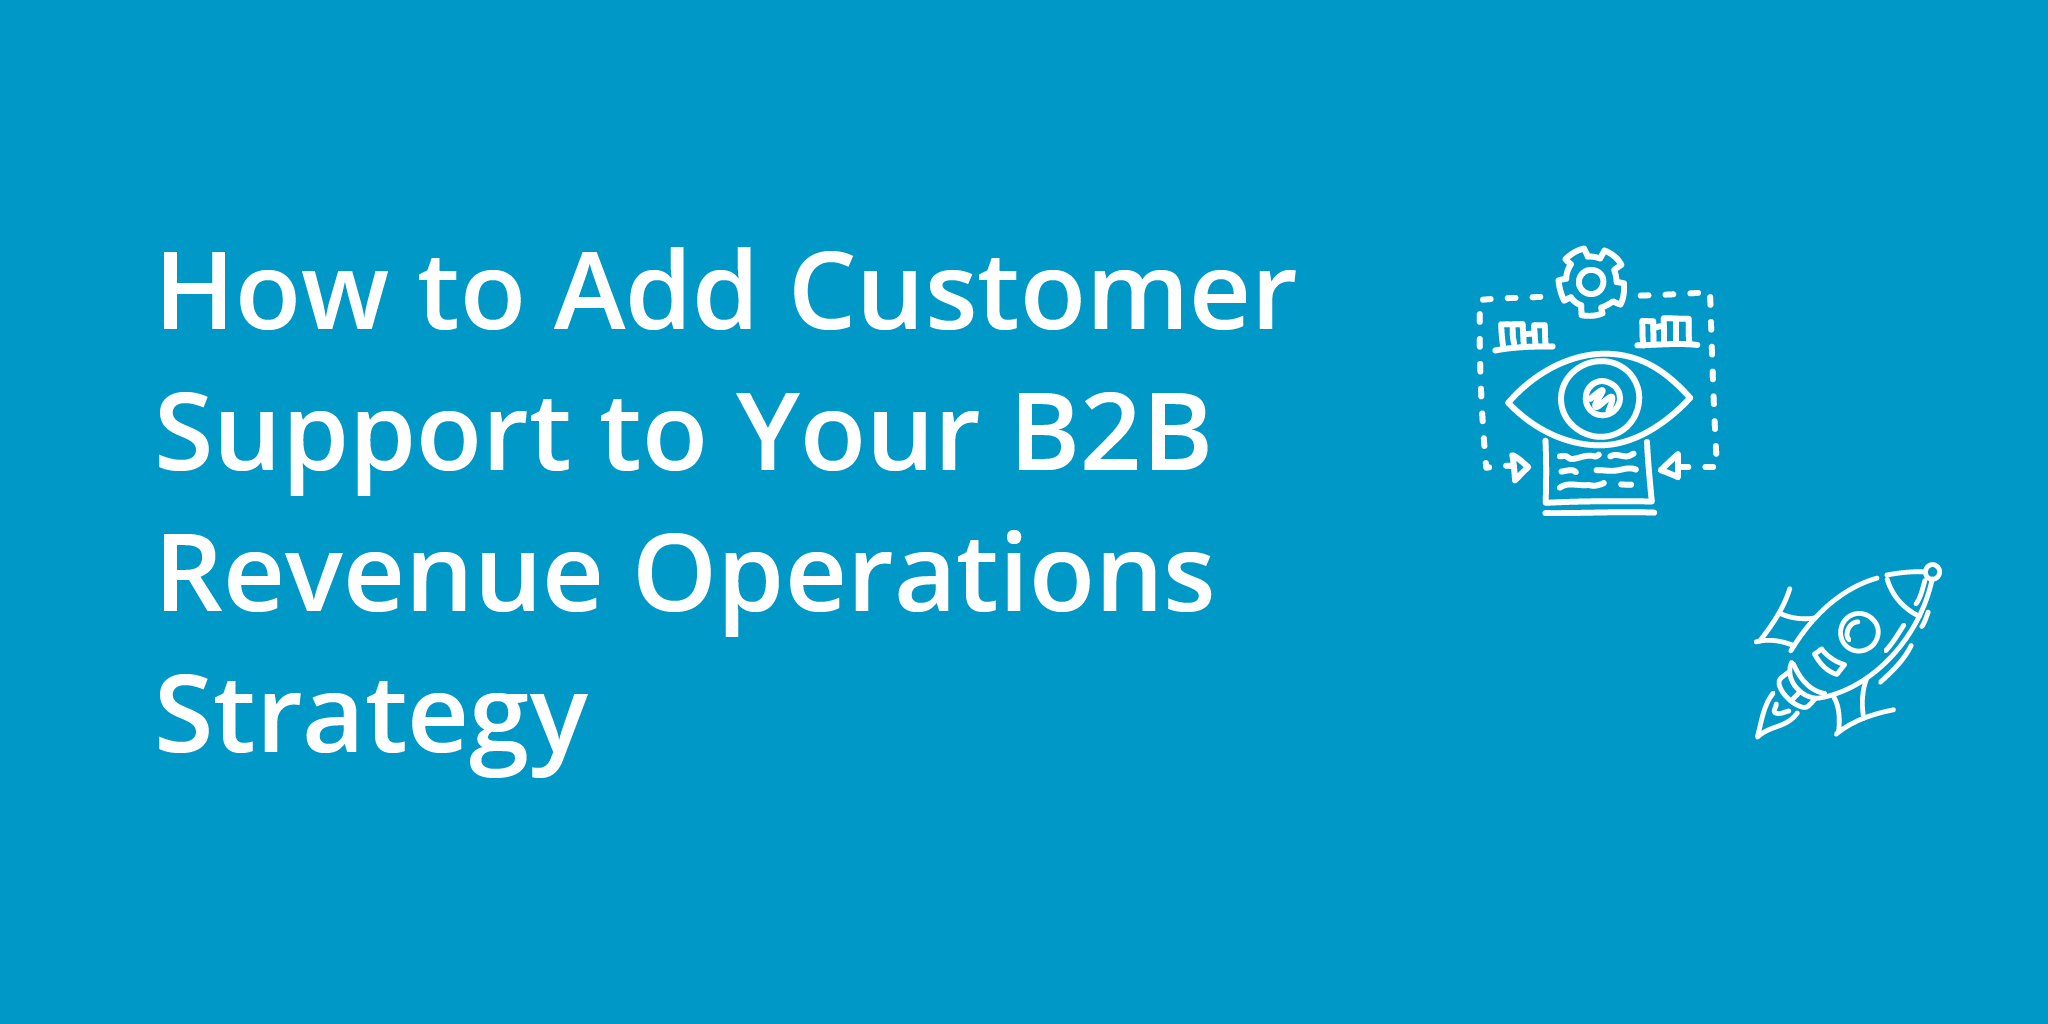 How to Add Customer Support to Your B2B Revenue Operations Strategy | Telephones for business